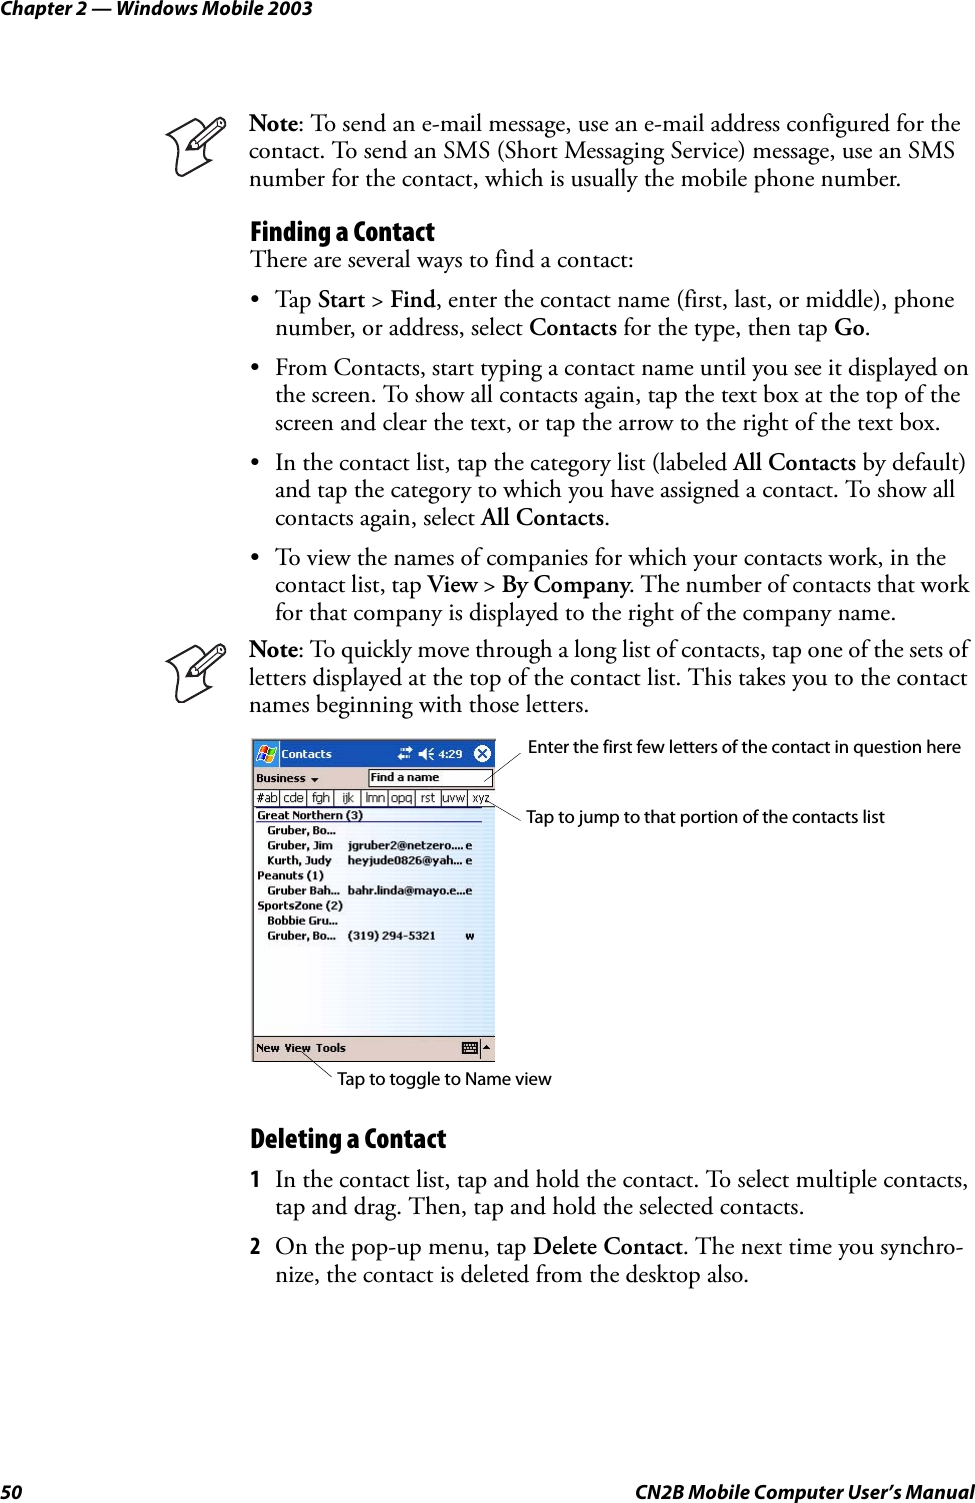 Chapter 2 — Windows Mobile 200350 CN2B Mobile Computer User’s ManualFinding a ContactThere are several ways to find a contact:•Tap Start &gt; Find, enter the contact name (first, last, or middle), phone number, or address, select Contacts for the type, then tap Go.• From Contacts, start typing a contact name until you see it displayed on the screen. To show all contacts again, tap the text box at the top of the screen and clear the text, or tap the arrow to the right of the text box.• In the contact list, tap the category list (labeled All Contacts by default) and tap the category to which you have assigned a contact. To show all contacts again, select All Contacts.• To view the names of companies for which your contacts work, in the contact list, tap View &gt; By Company. The number of contacts that work for that company is displayed to the right of the company name.Deleting a Contact1In the contact list, tap and hold the contact. To select multiple contacts, tap and drag. Then, tap and hold the selected contacts.2On the pop-up menu, tap Delete Contact. The next time you synchro-nize, the contact is deleted from the desktop also.Note: To send an e-mail message, use an e-mail address configured for the contact. To send an SMS (Short Messaging Service) message, use an SMS number for the contact, which is usually the mobile phone number.Note: To quickly move through a long list of contacts, tap one of the sets of letters displayed at the top of the contact list. This takes you to the contact names beginning with those letters.Enter the first few letters of the contact in question hereTap to jump to that portion of the contacts listTap to toggle to Name view